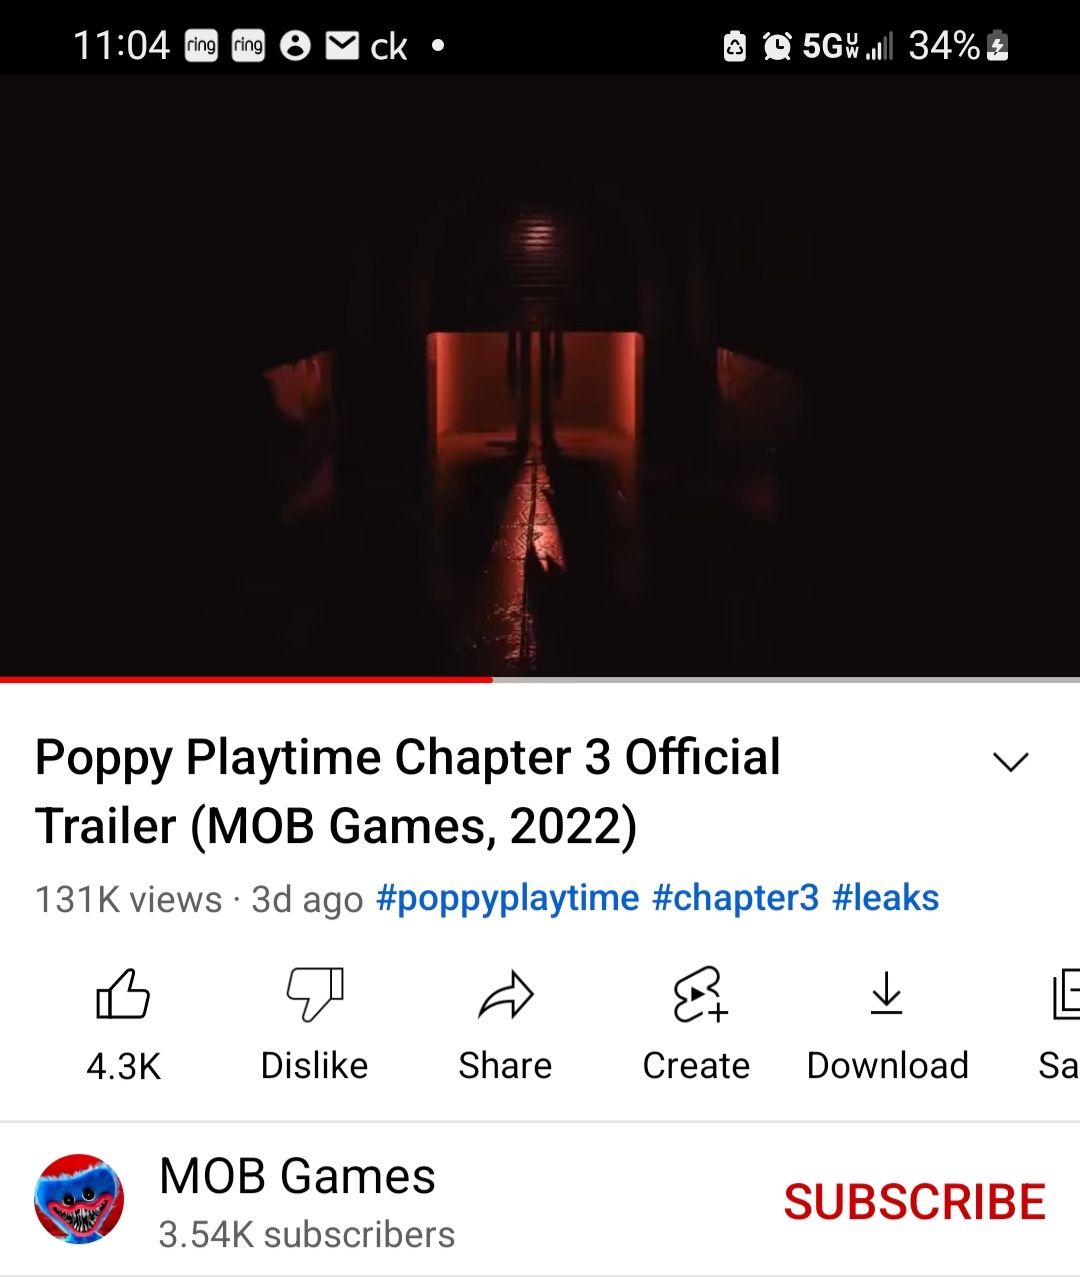 Poppy Playtime: Chapter 3 - OFFiCiaL TrAILEr iS oUT!!.. 